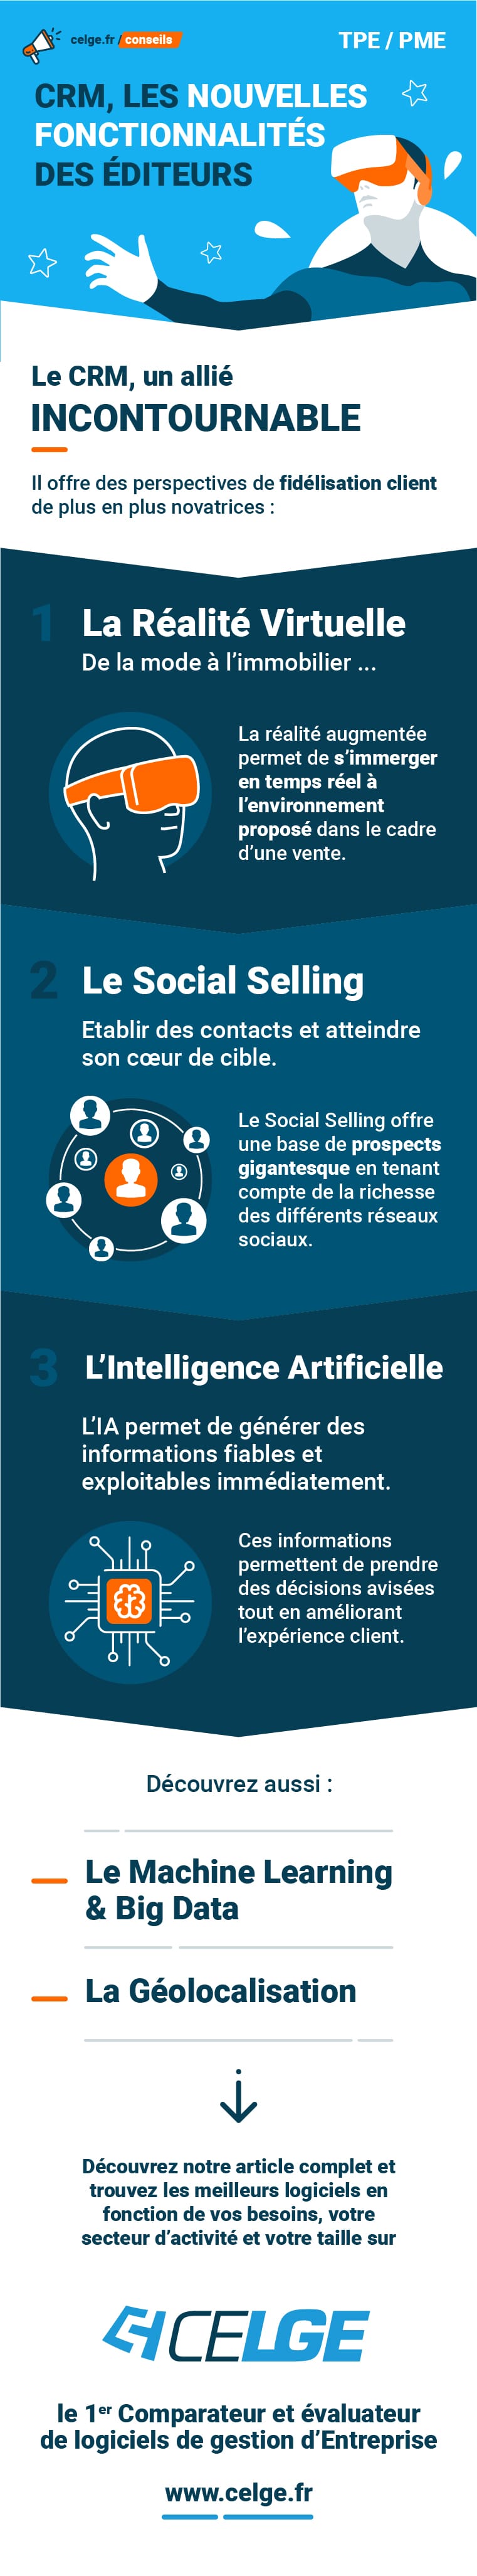 infographie CRM